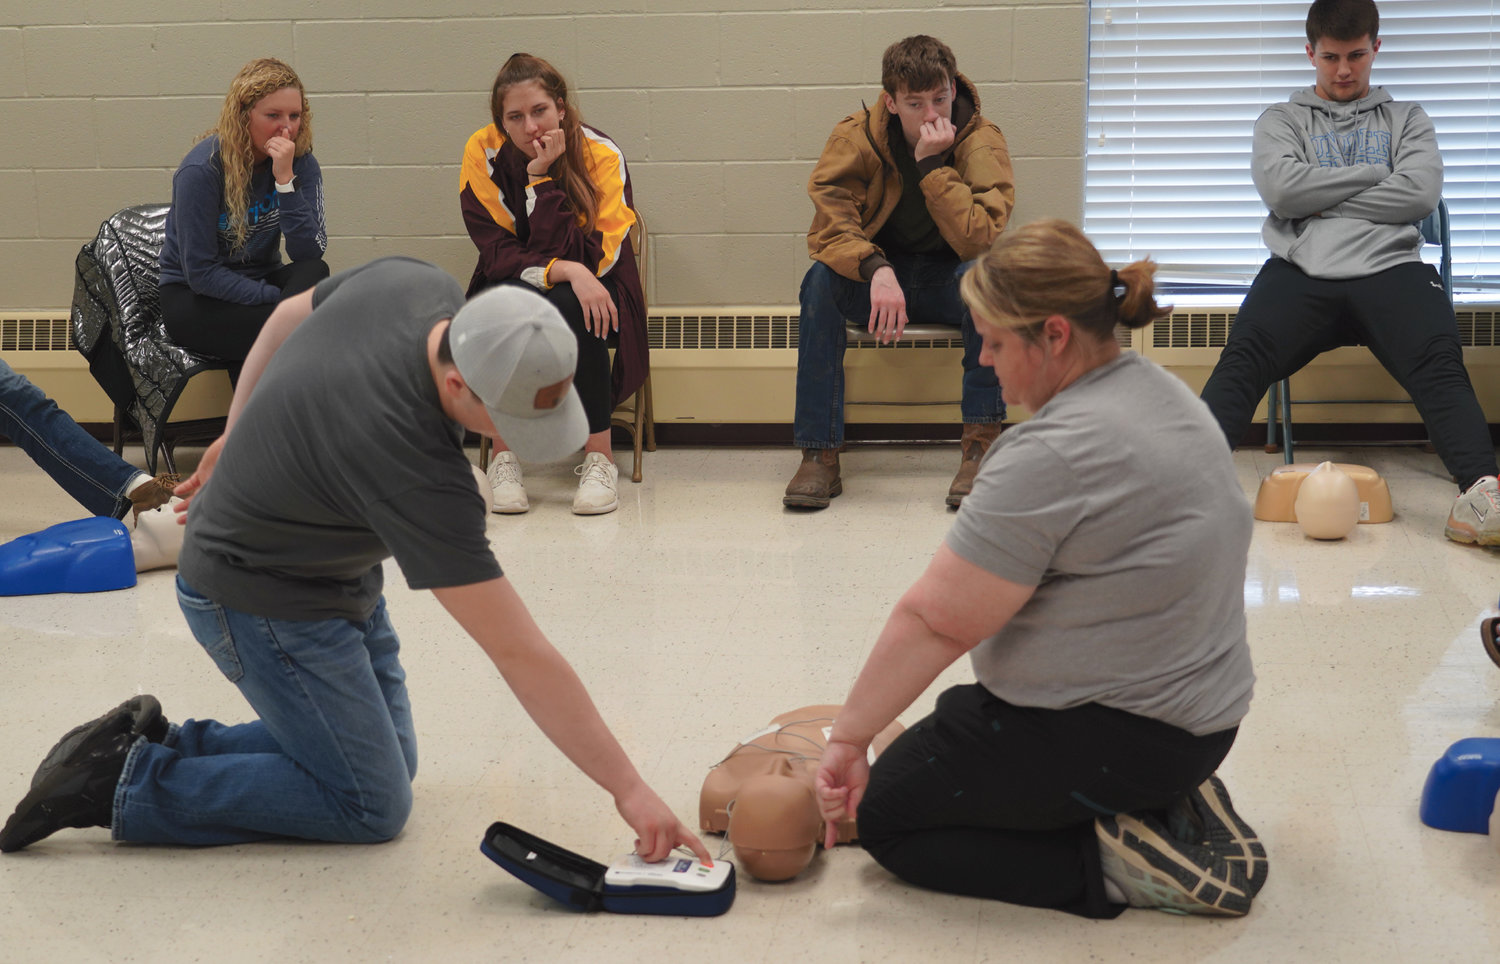 De Smet seniors are participating in a CPR class required by South Dakota before graduation. The class assembled in the community classroom of the armory on Wednesday and watched as Jodi Jung, CNP, right, who works for Horizon Health Care, demonstrates the use of an Automated External Defibrillator (AED), while Cody Aughenbaugh presses the button on the AED to deliver a lifesaving shock.